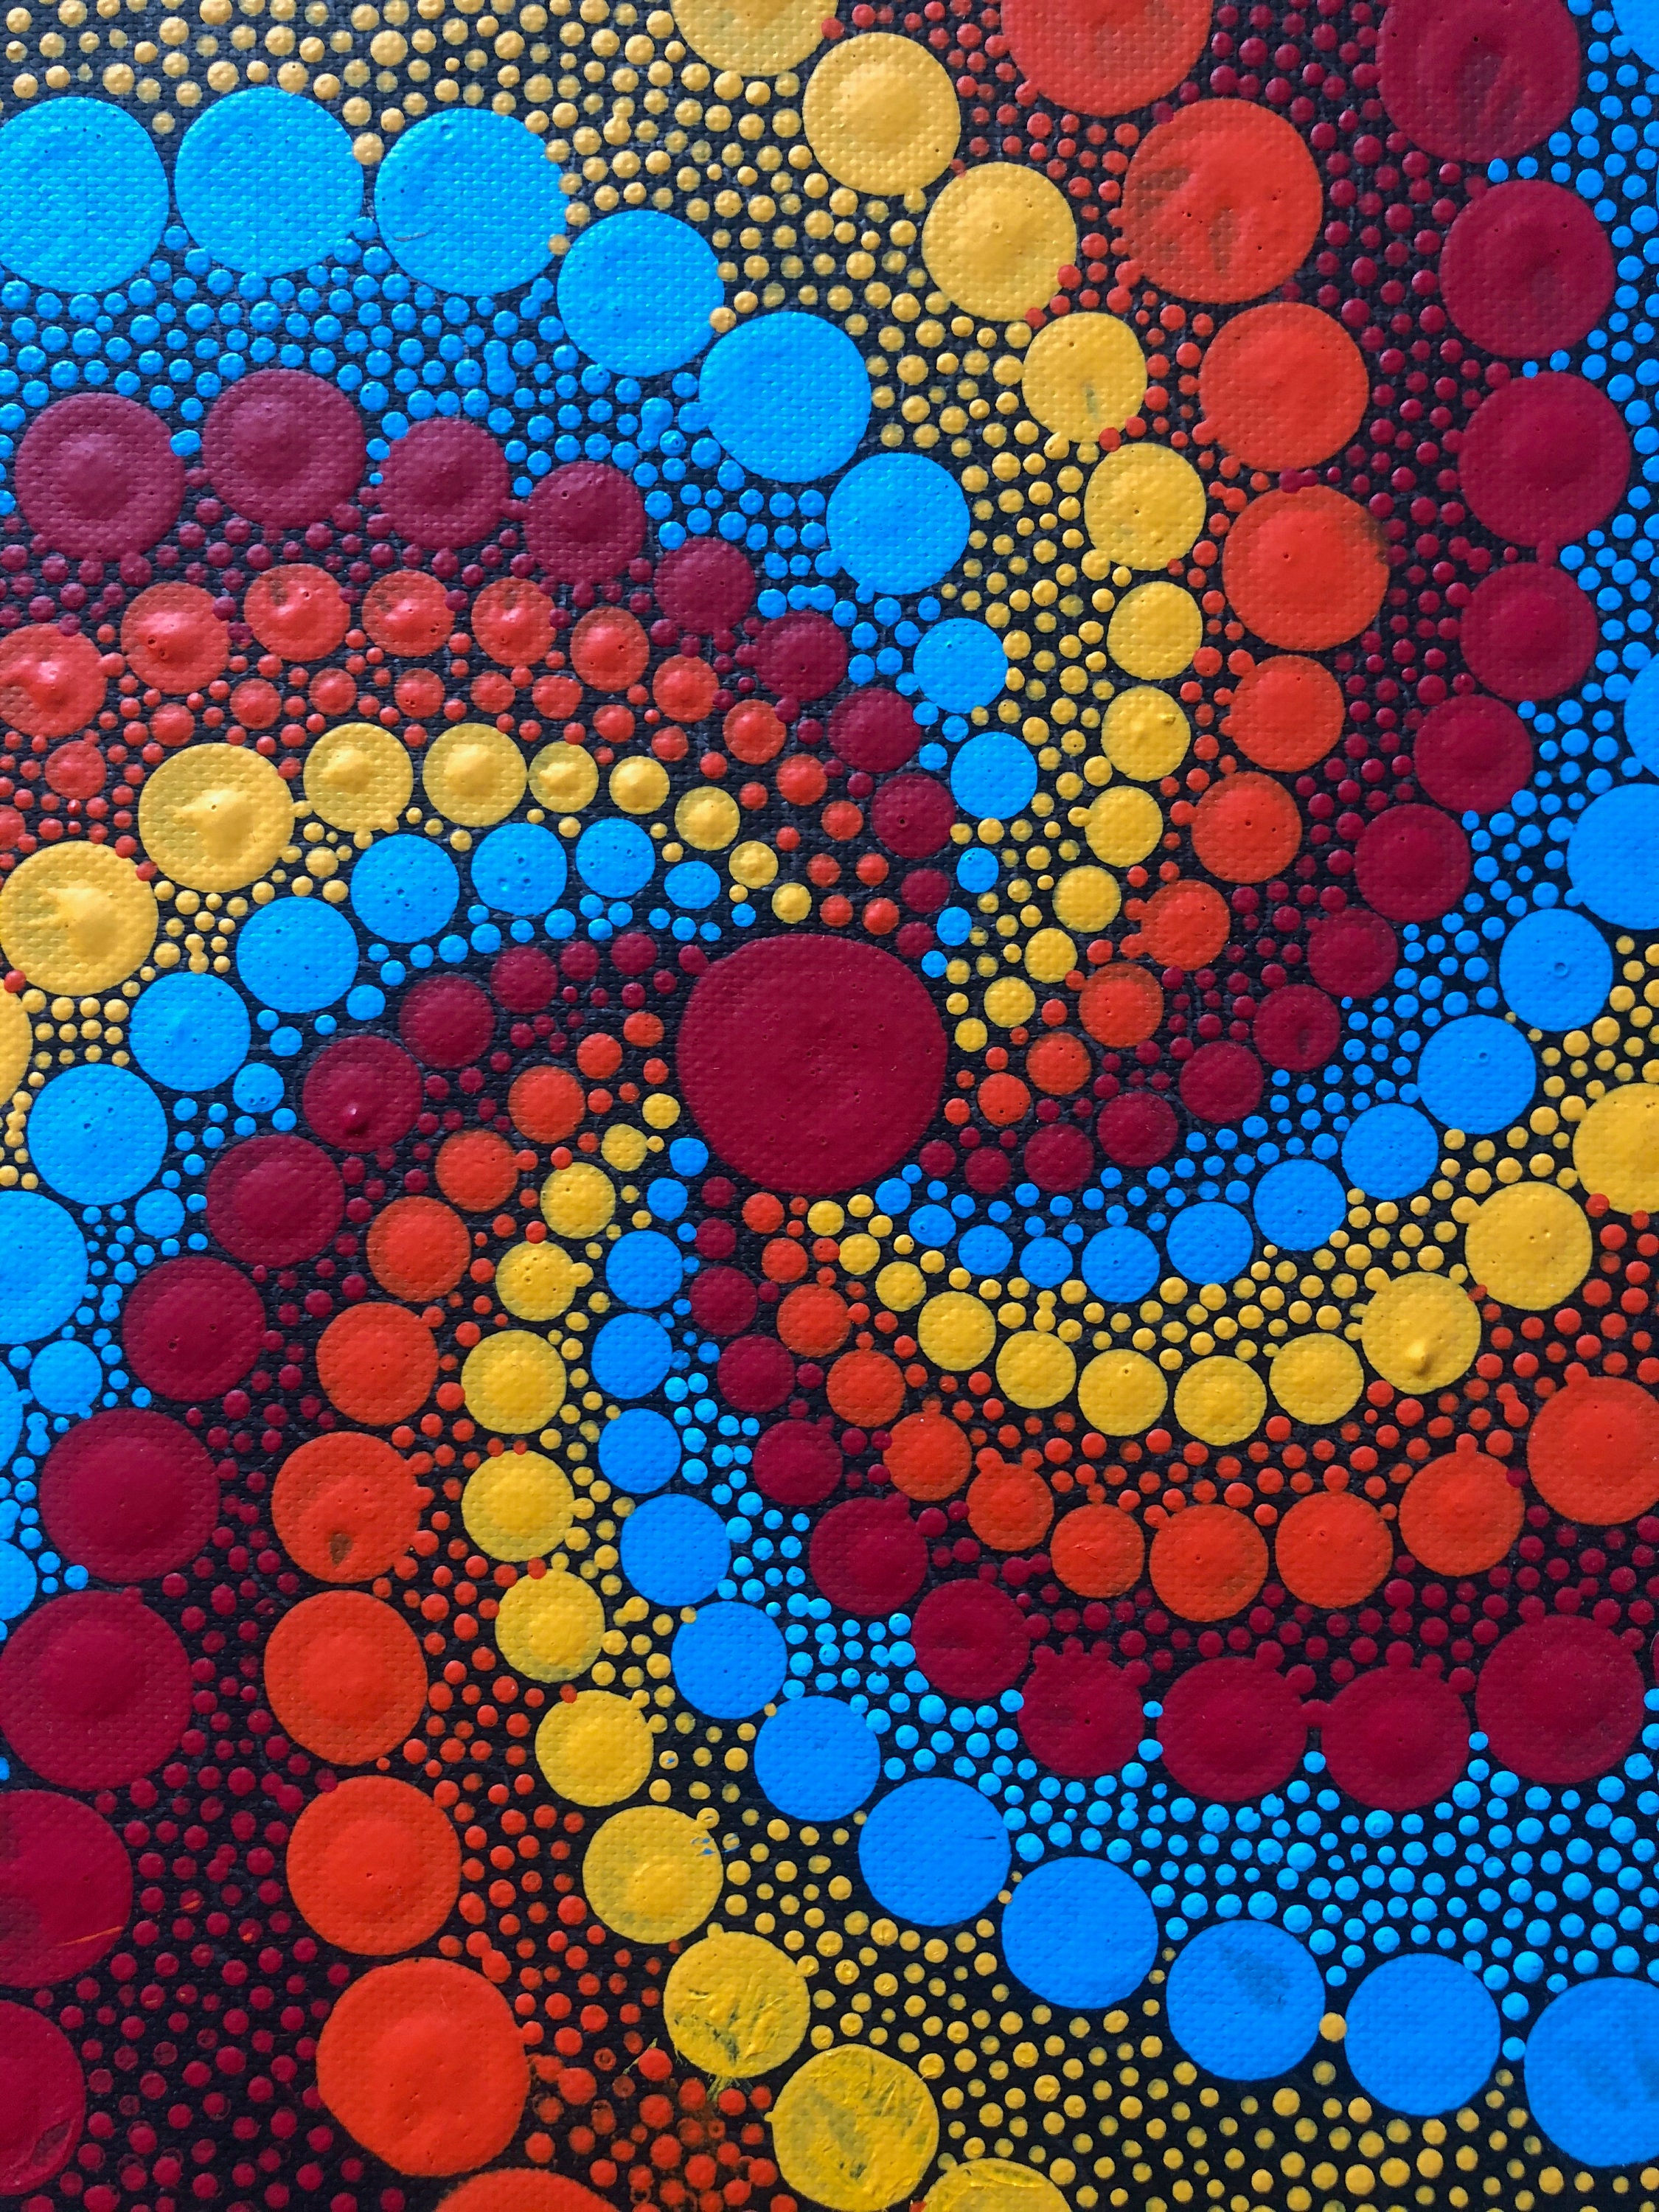 Intro to Mandalas 2: Dots and Swooshes – The Cob Mercantile and